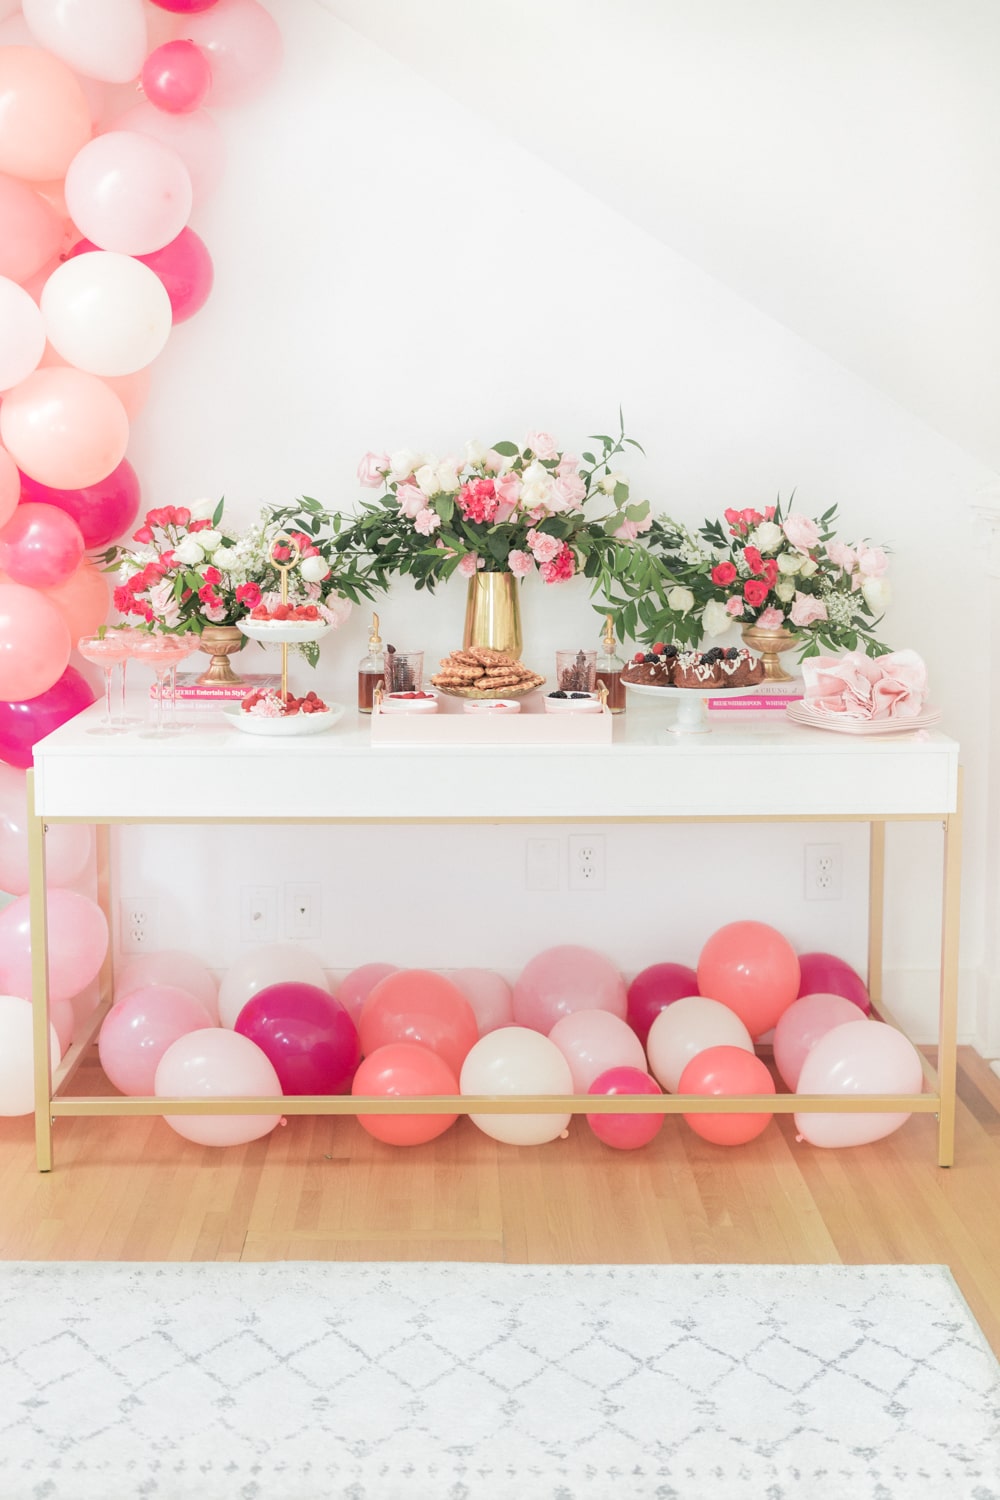 Galentine's Day brunch ideas from blogger Stephanie Ziajka on Diary of a Debutante